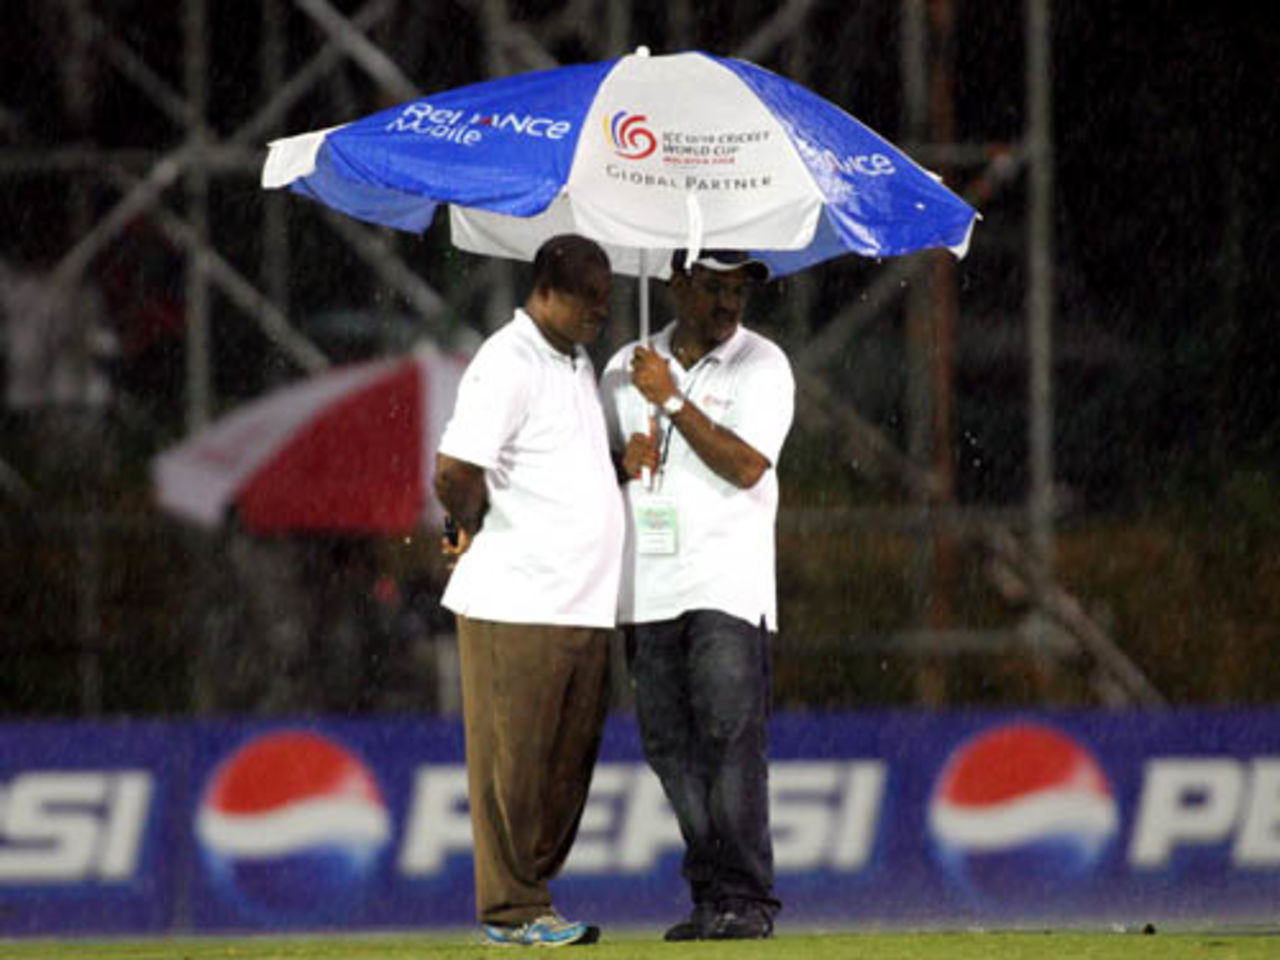 Officials take cover while inspecting the outfield, Pakistan v South Africa, 2nd semi-final, Under-19 World Cup, Kuala Lumpur, February 29, 2008 